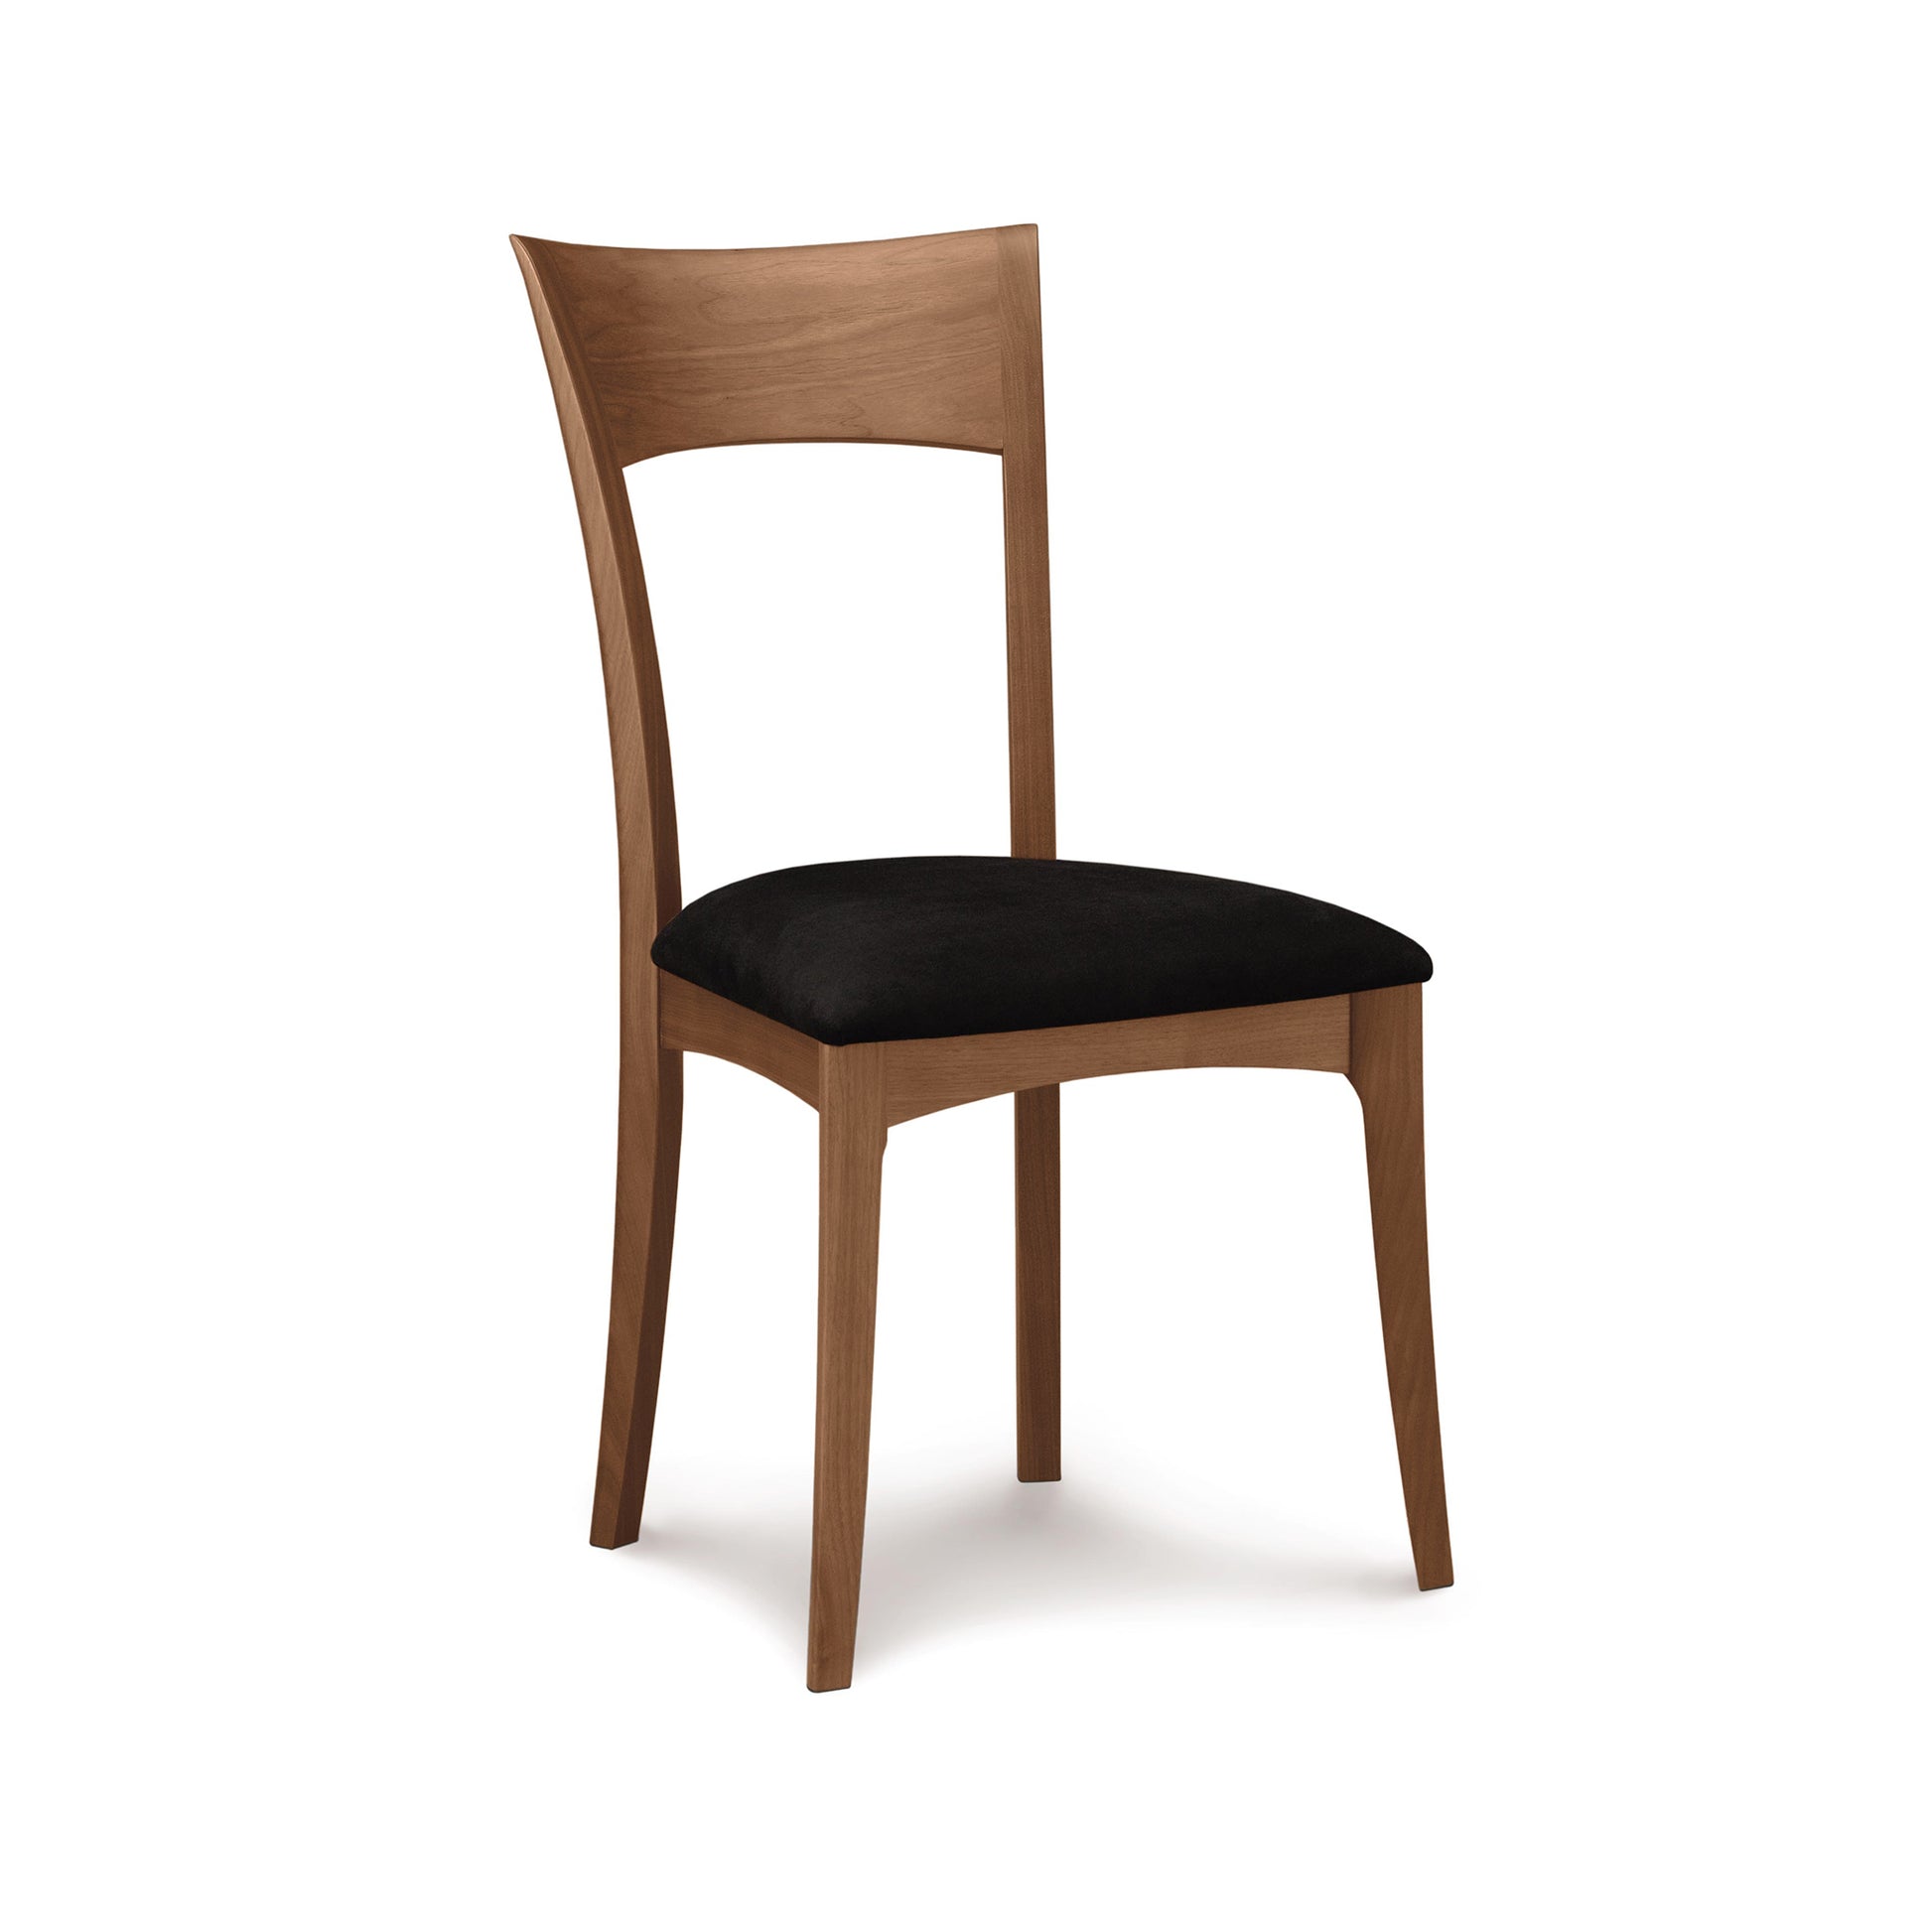 A Ingrid Chair from the Copeland Furniture collection, with a curved backrest and a black upholstered seat, isolated on a white background.